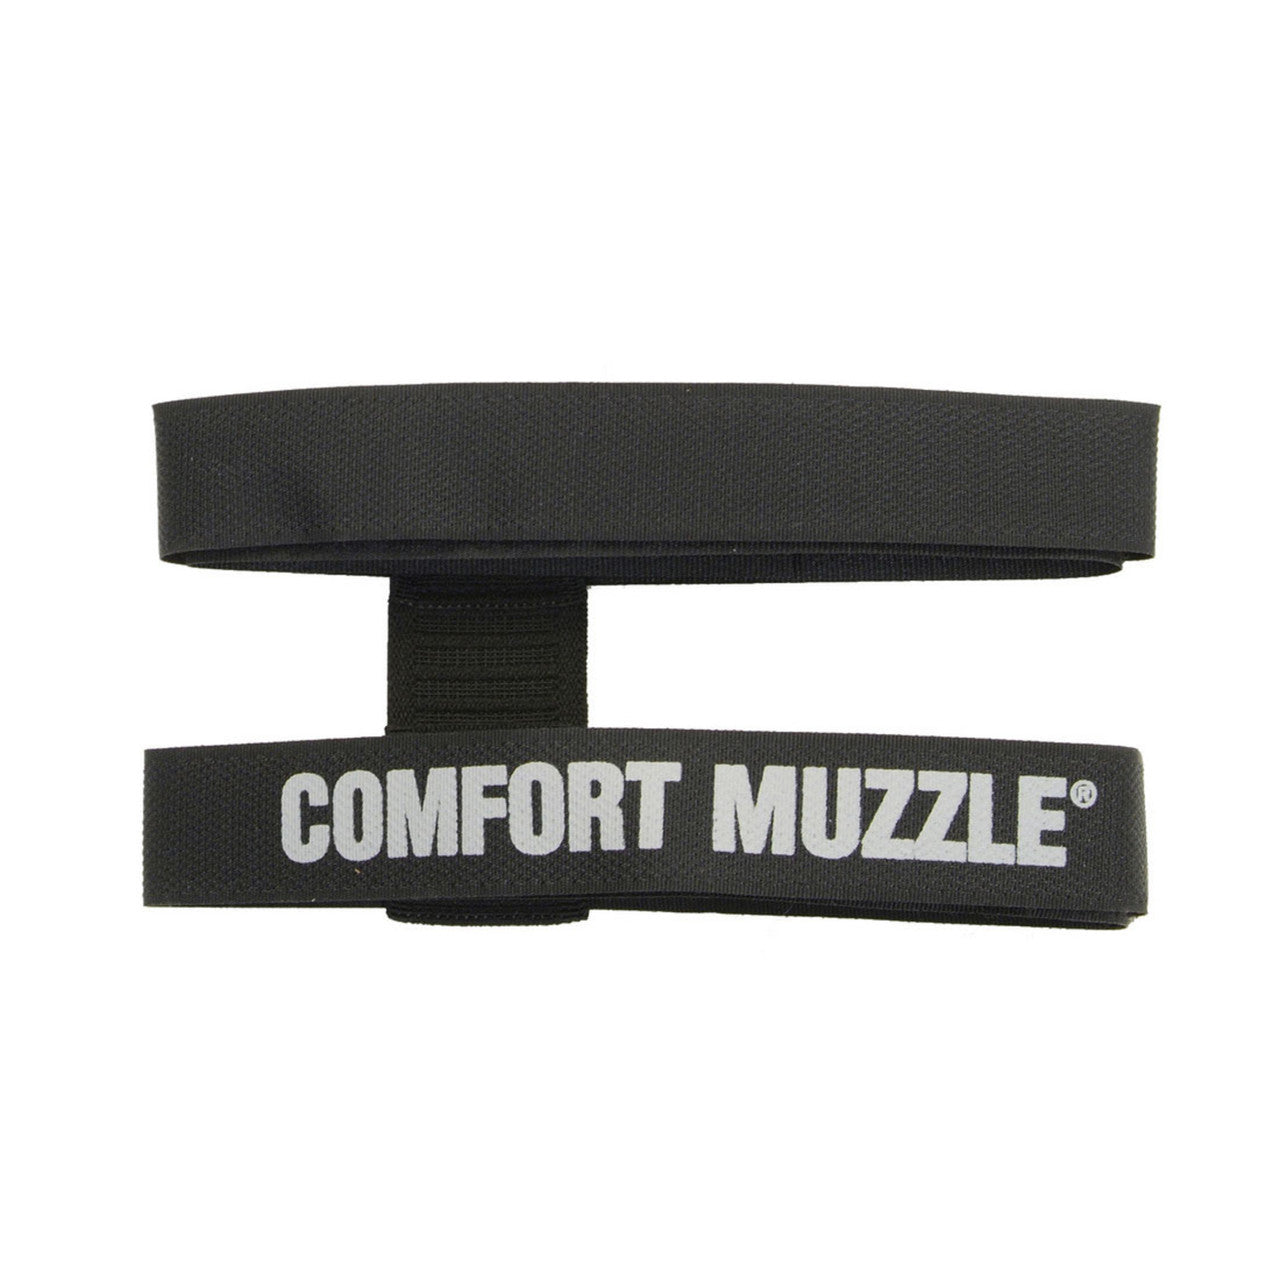 Comfort Muzzle Adjustable Muzzle for Dogs 16-24in LG